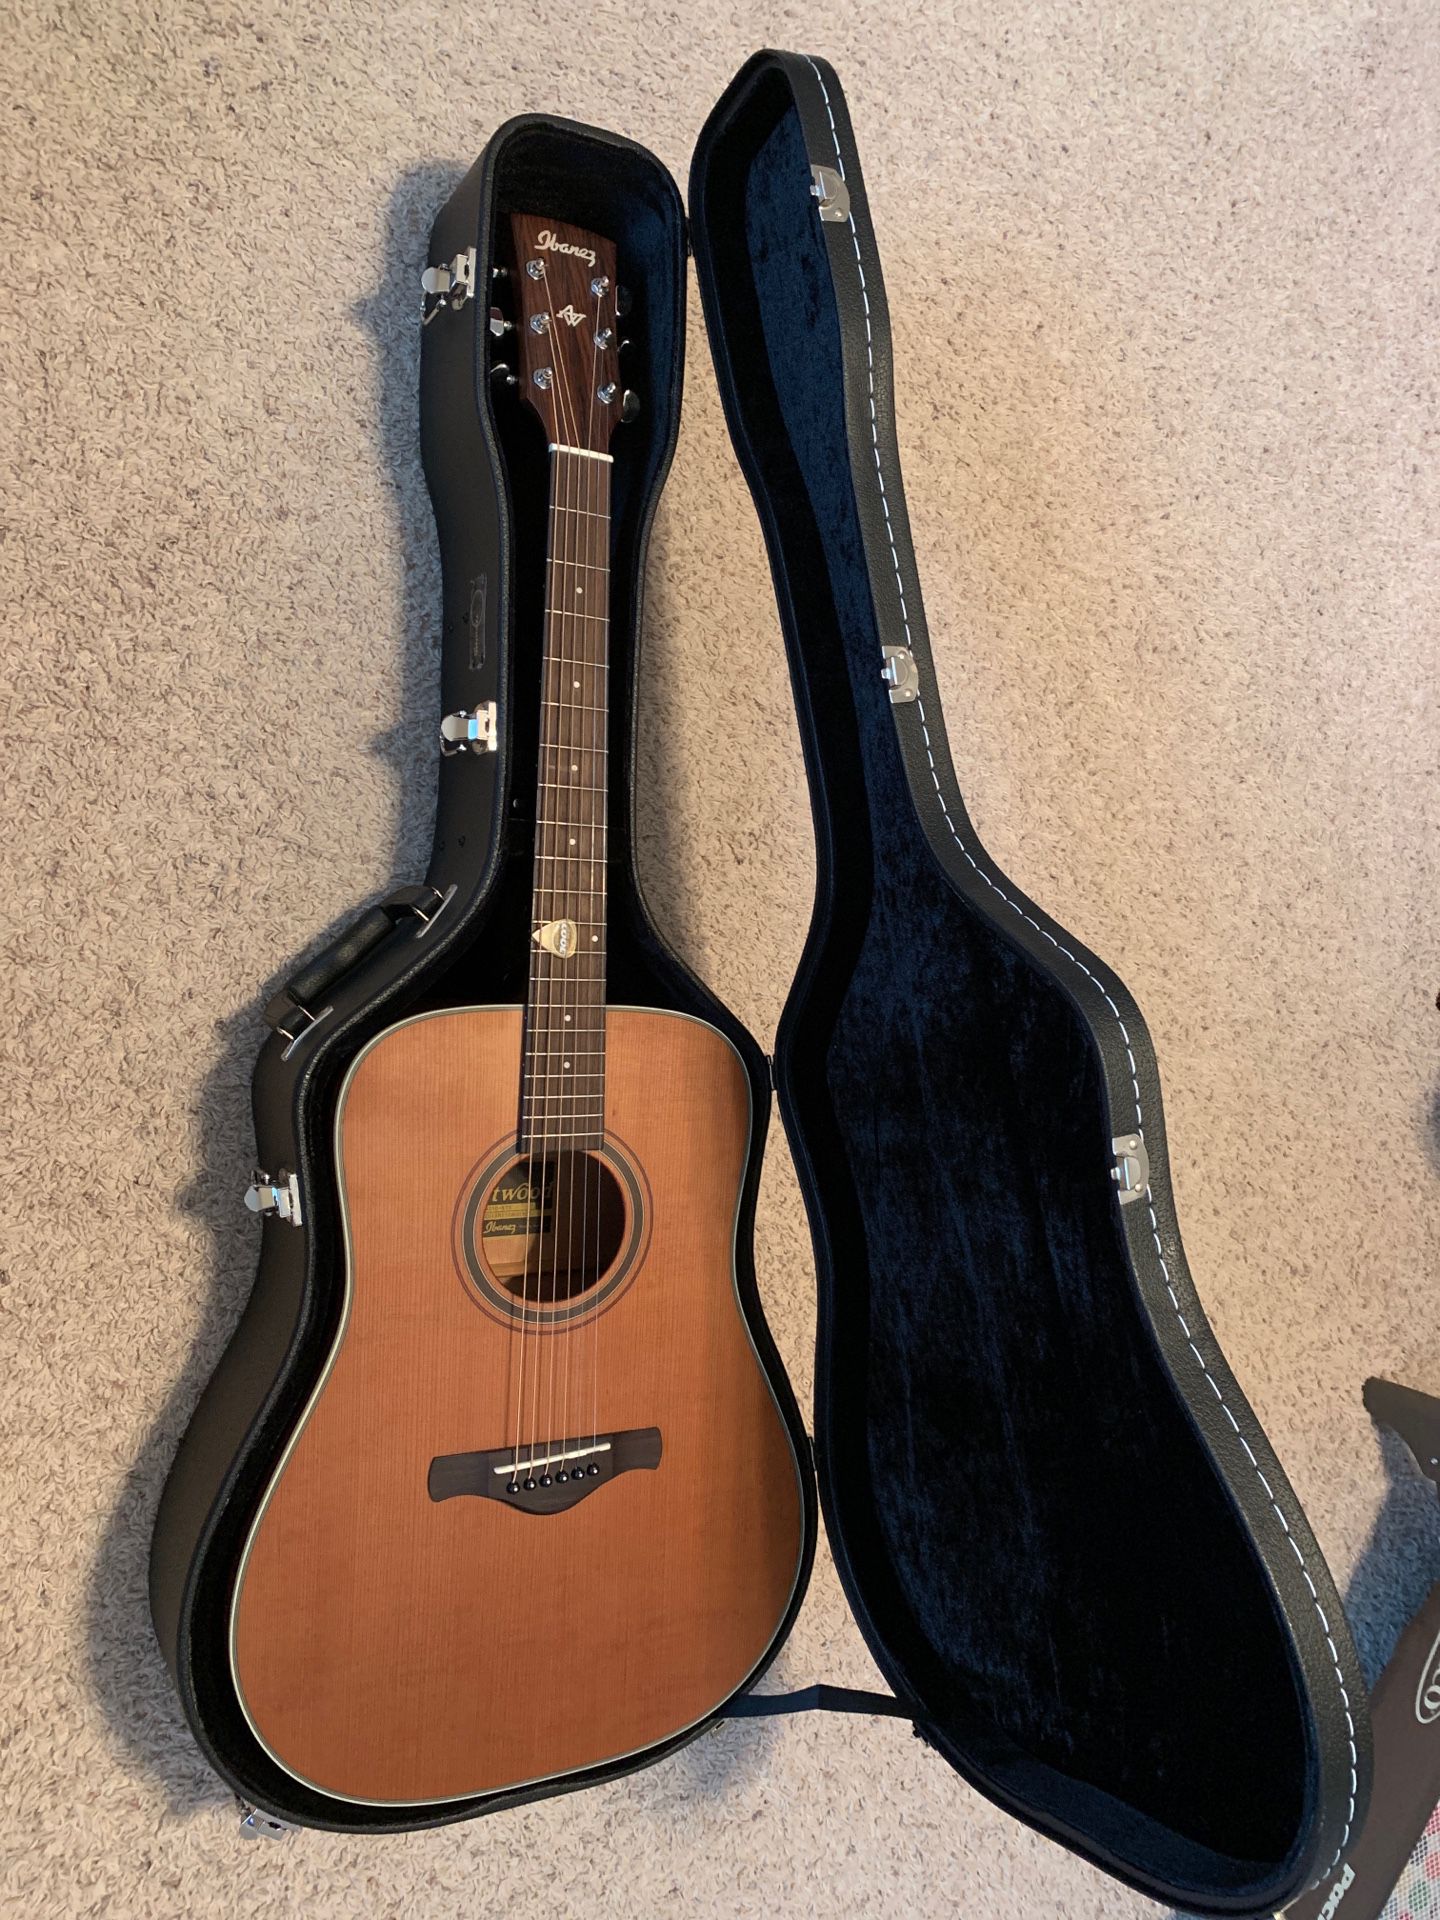 Ibanez AW250-RTB (acoustic guitar)